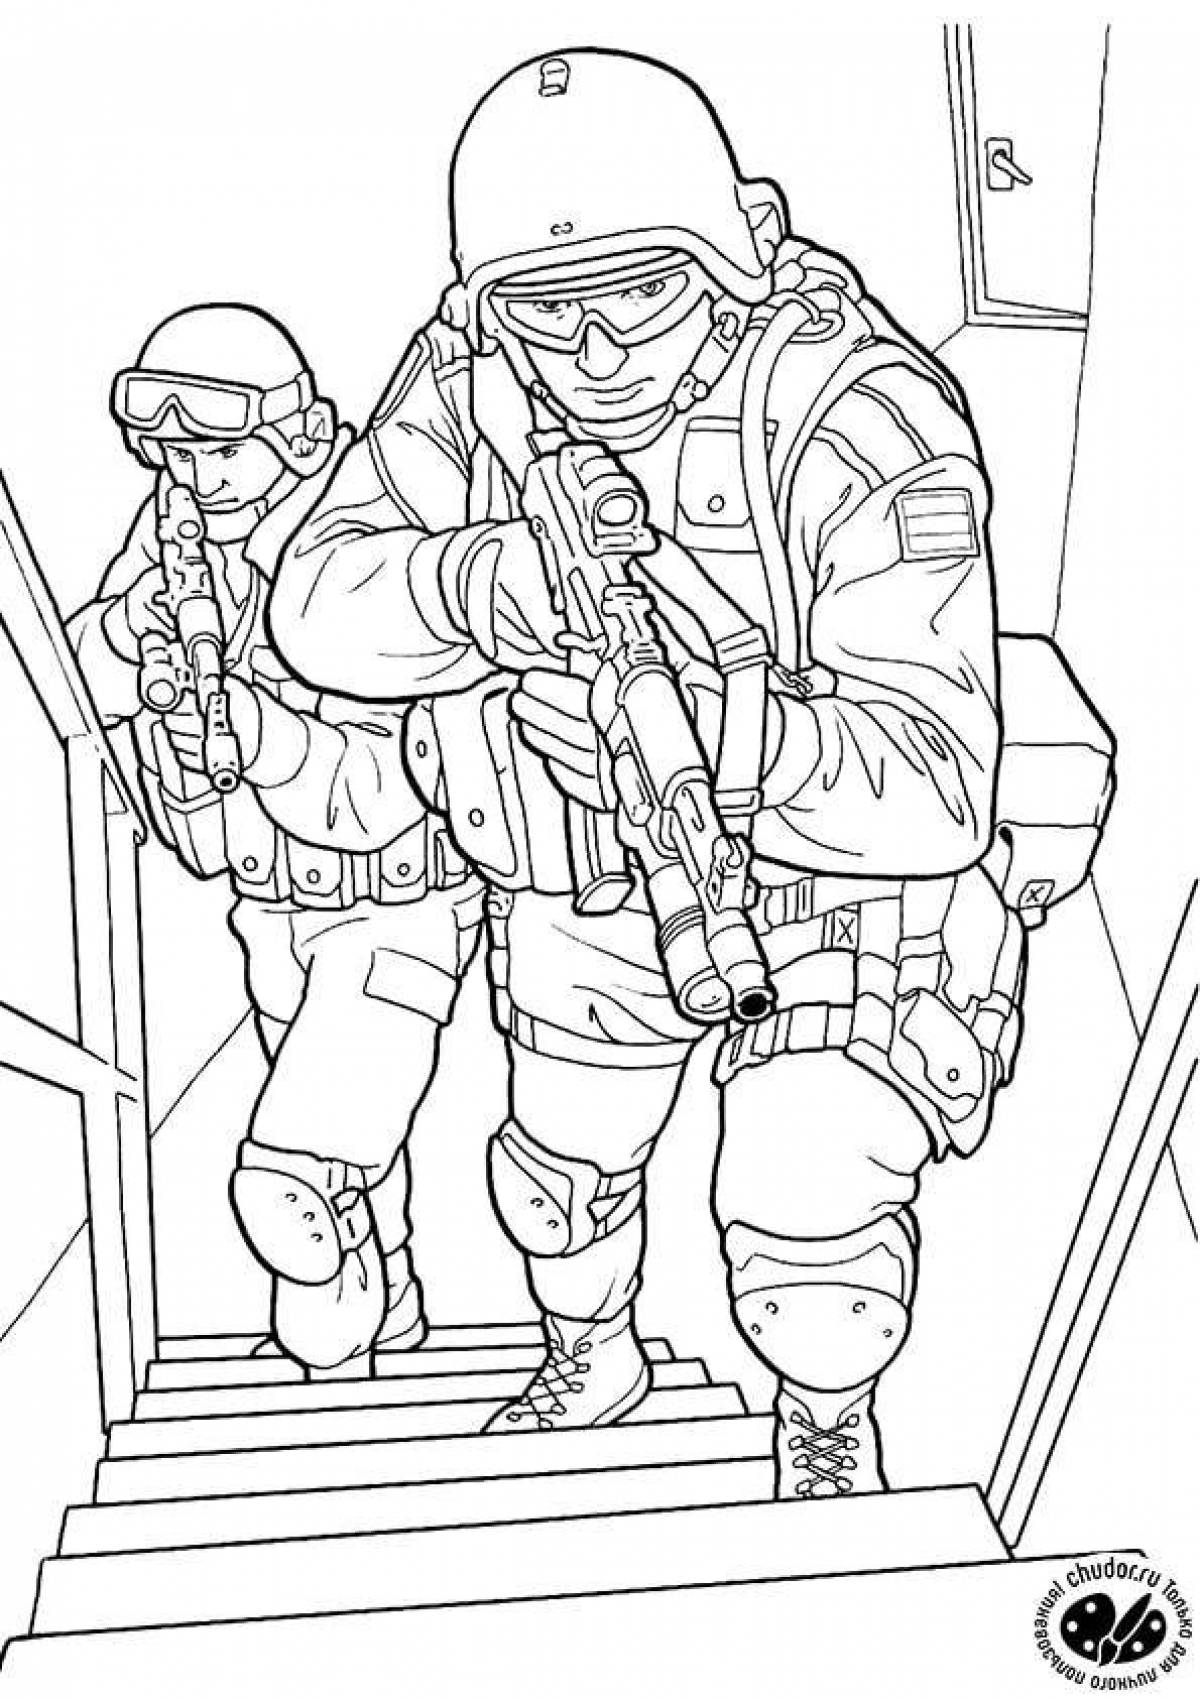 Exquisite special forces coloring book for kids